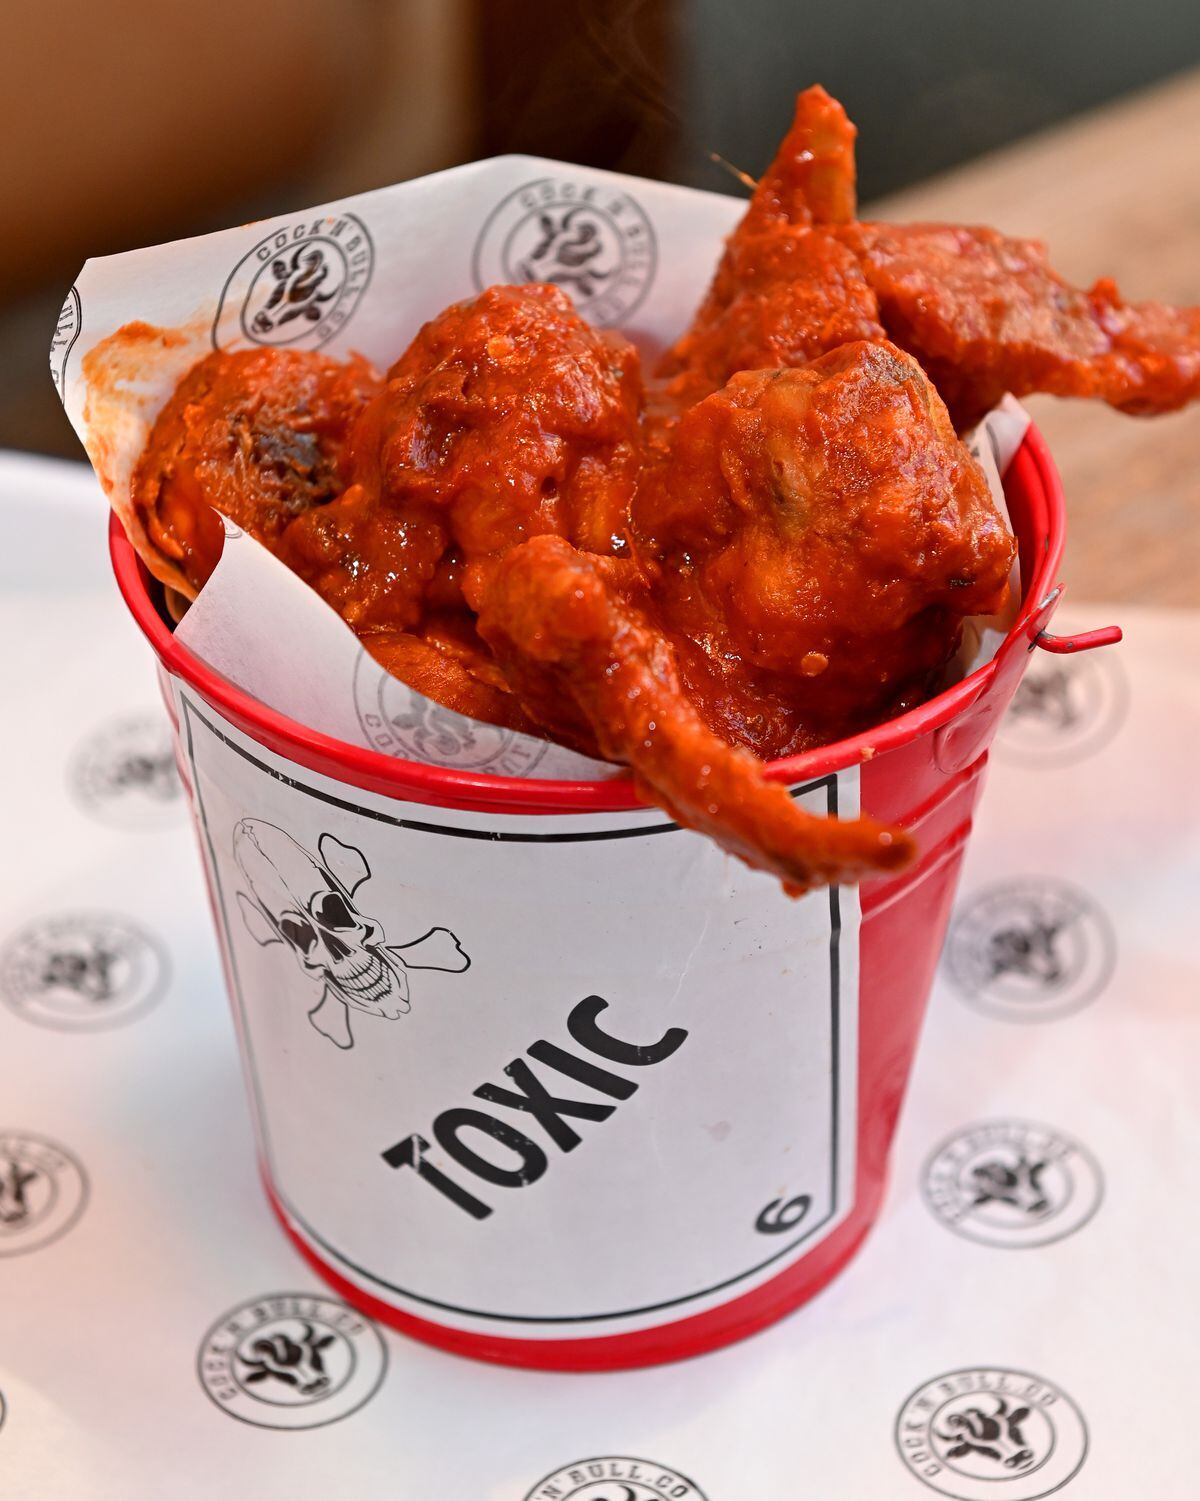 The challenge involves eat six hot wings covered in hot sauce in six minutes, then six minutes to sit and let it burn